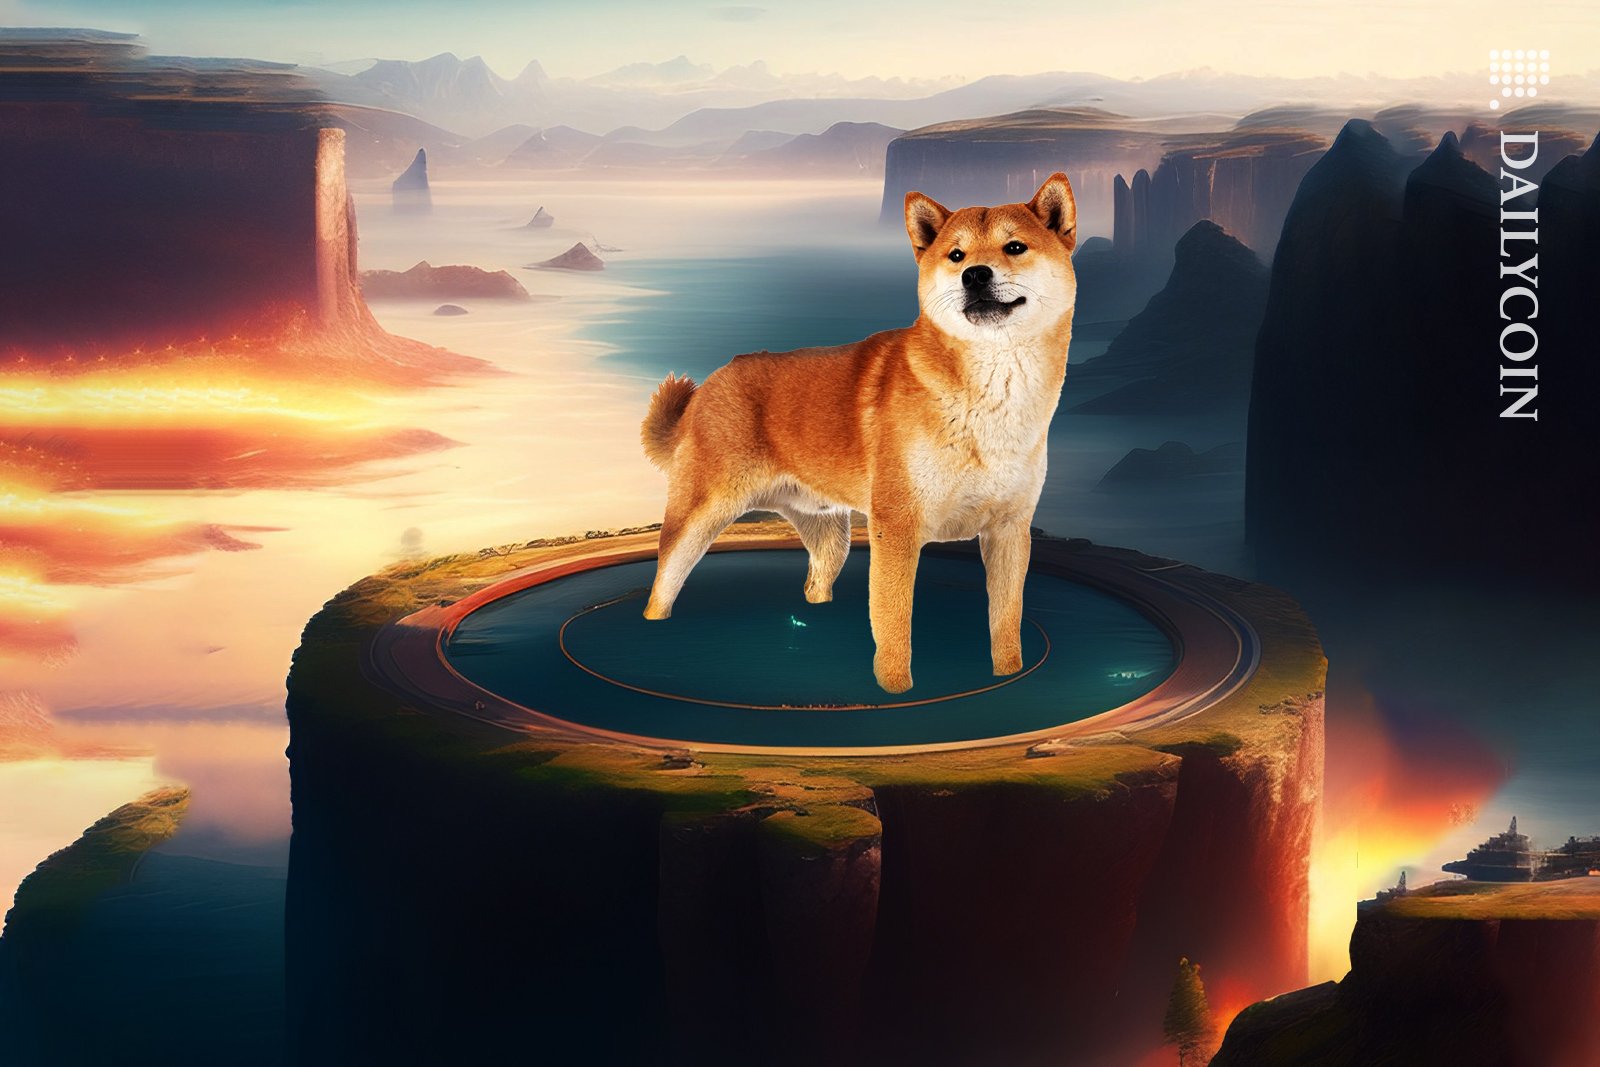 Shiba Inu dog proudly standing on a coin in the mountains in SHIB: The Metaverse